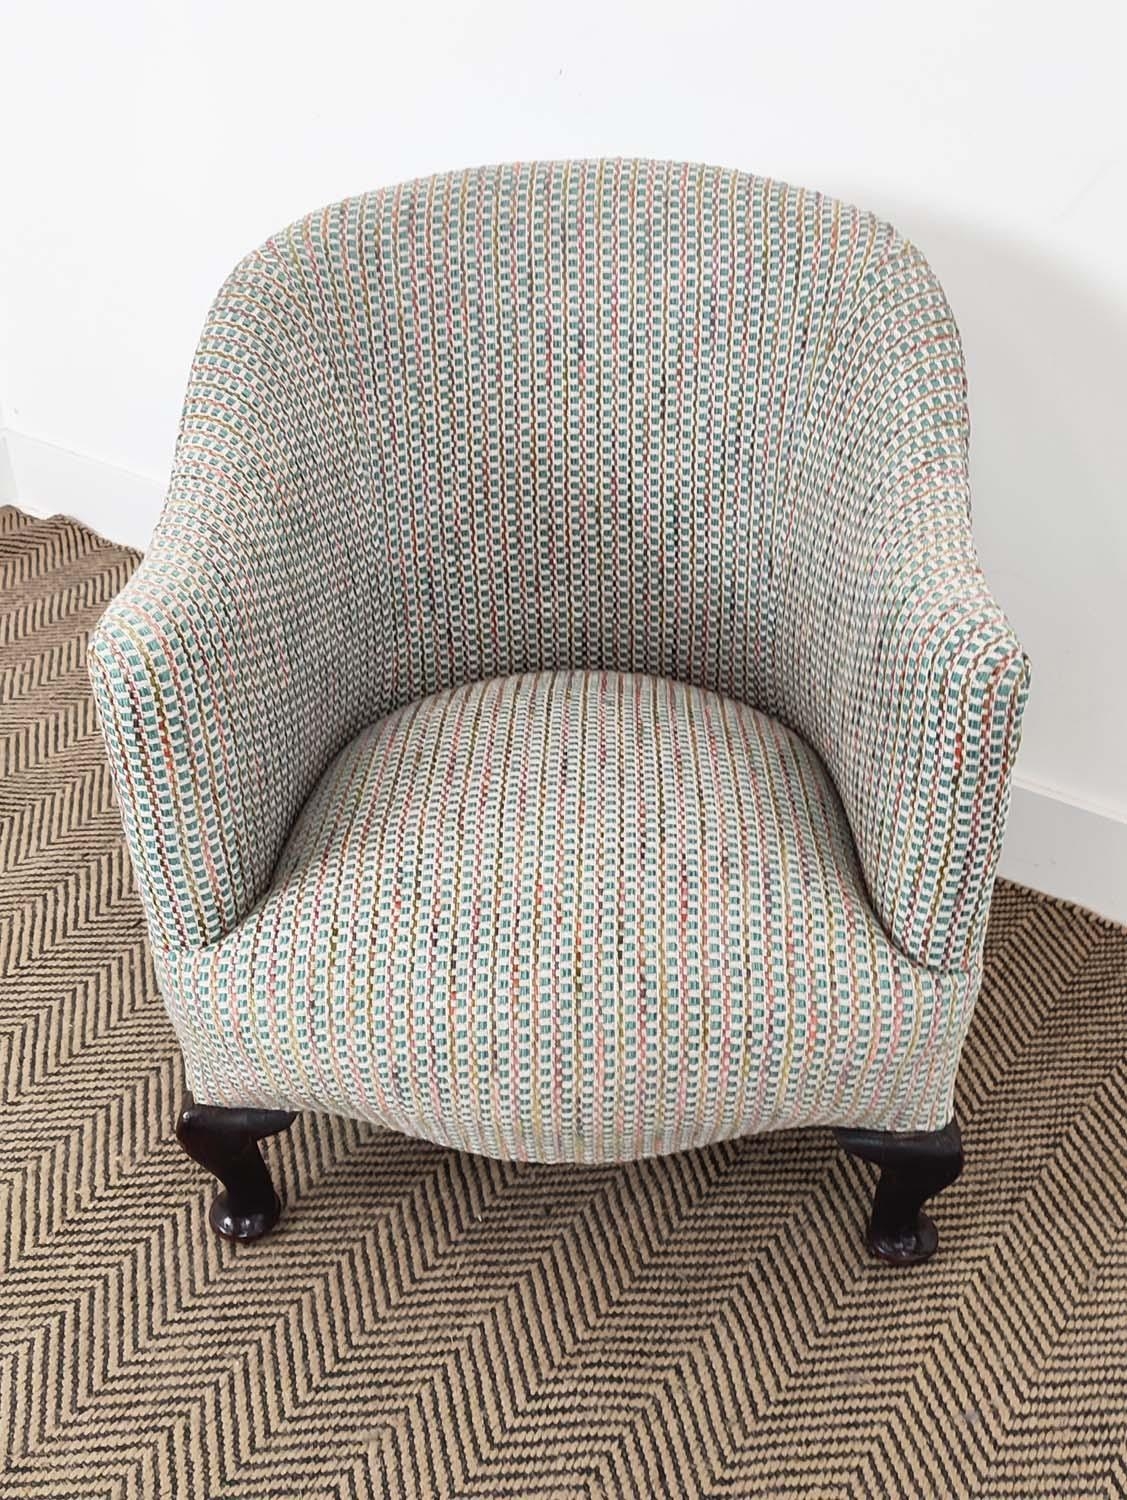 TUB CHAIR, Edwardian mahogany in patterned chenille, 71cm H x 58cm. - Image 5 of 12